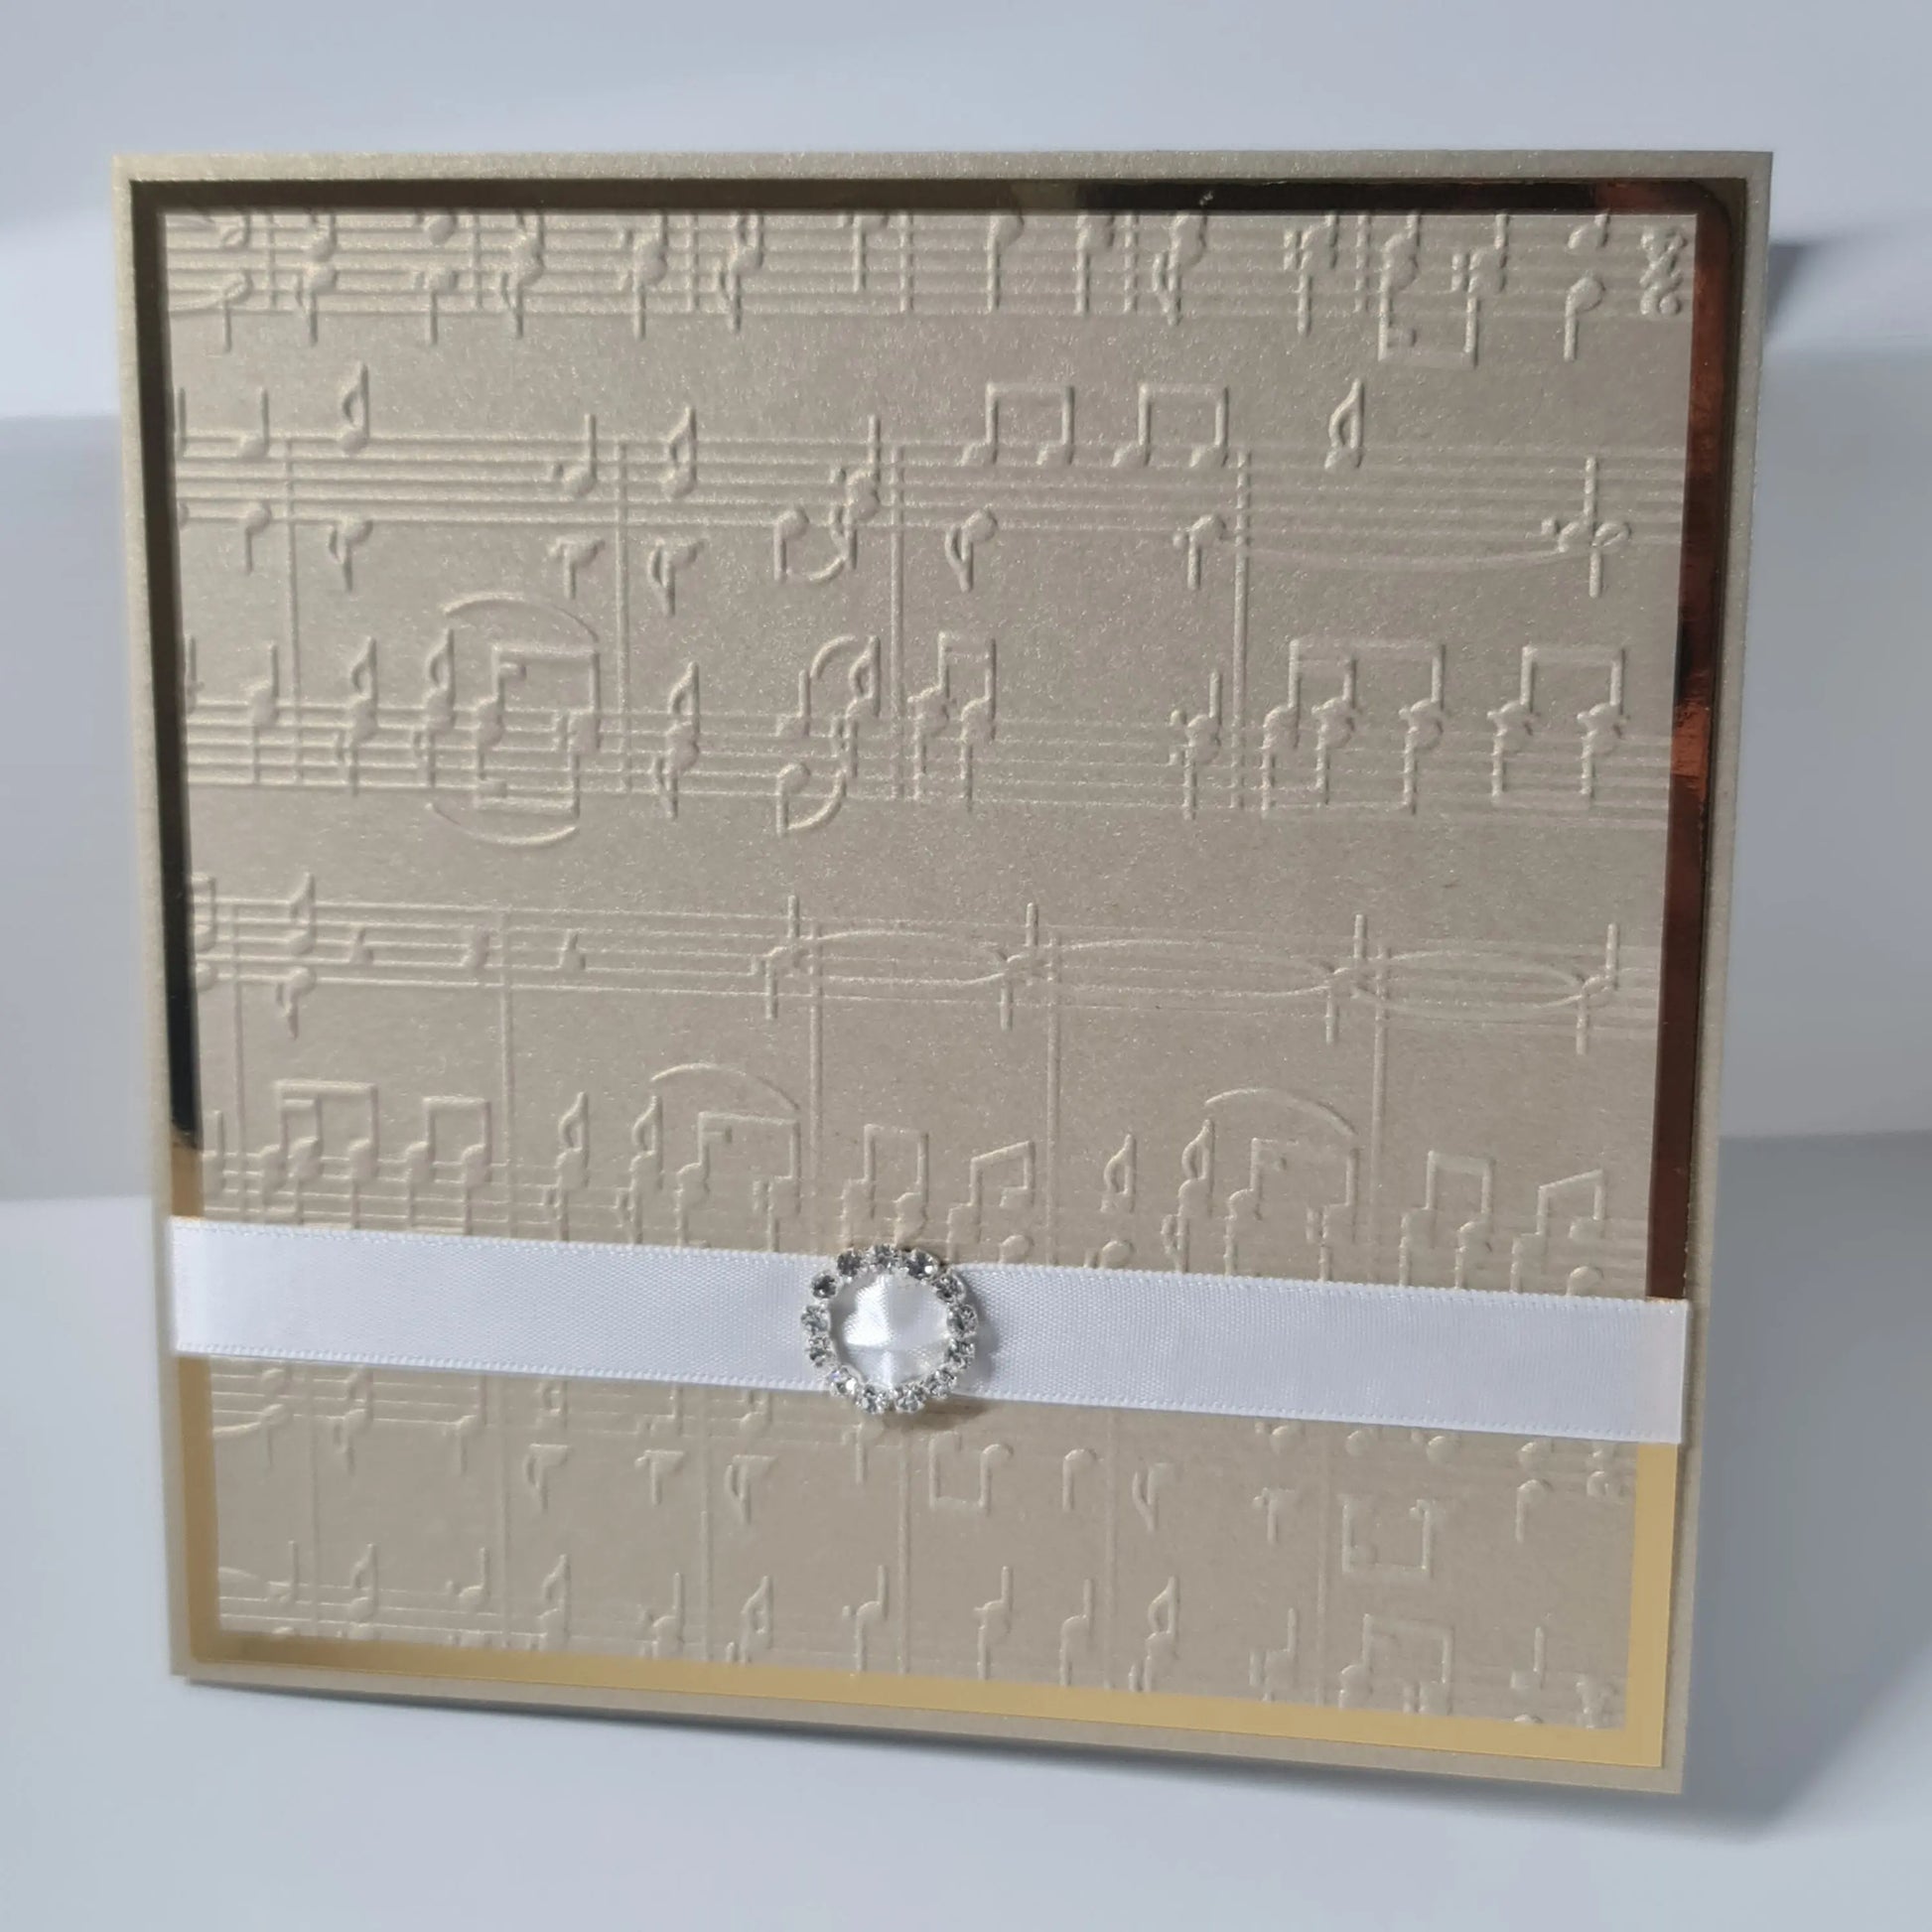 Music Note - Shimmer Card - Silver & Gold Paper Love Cards